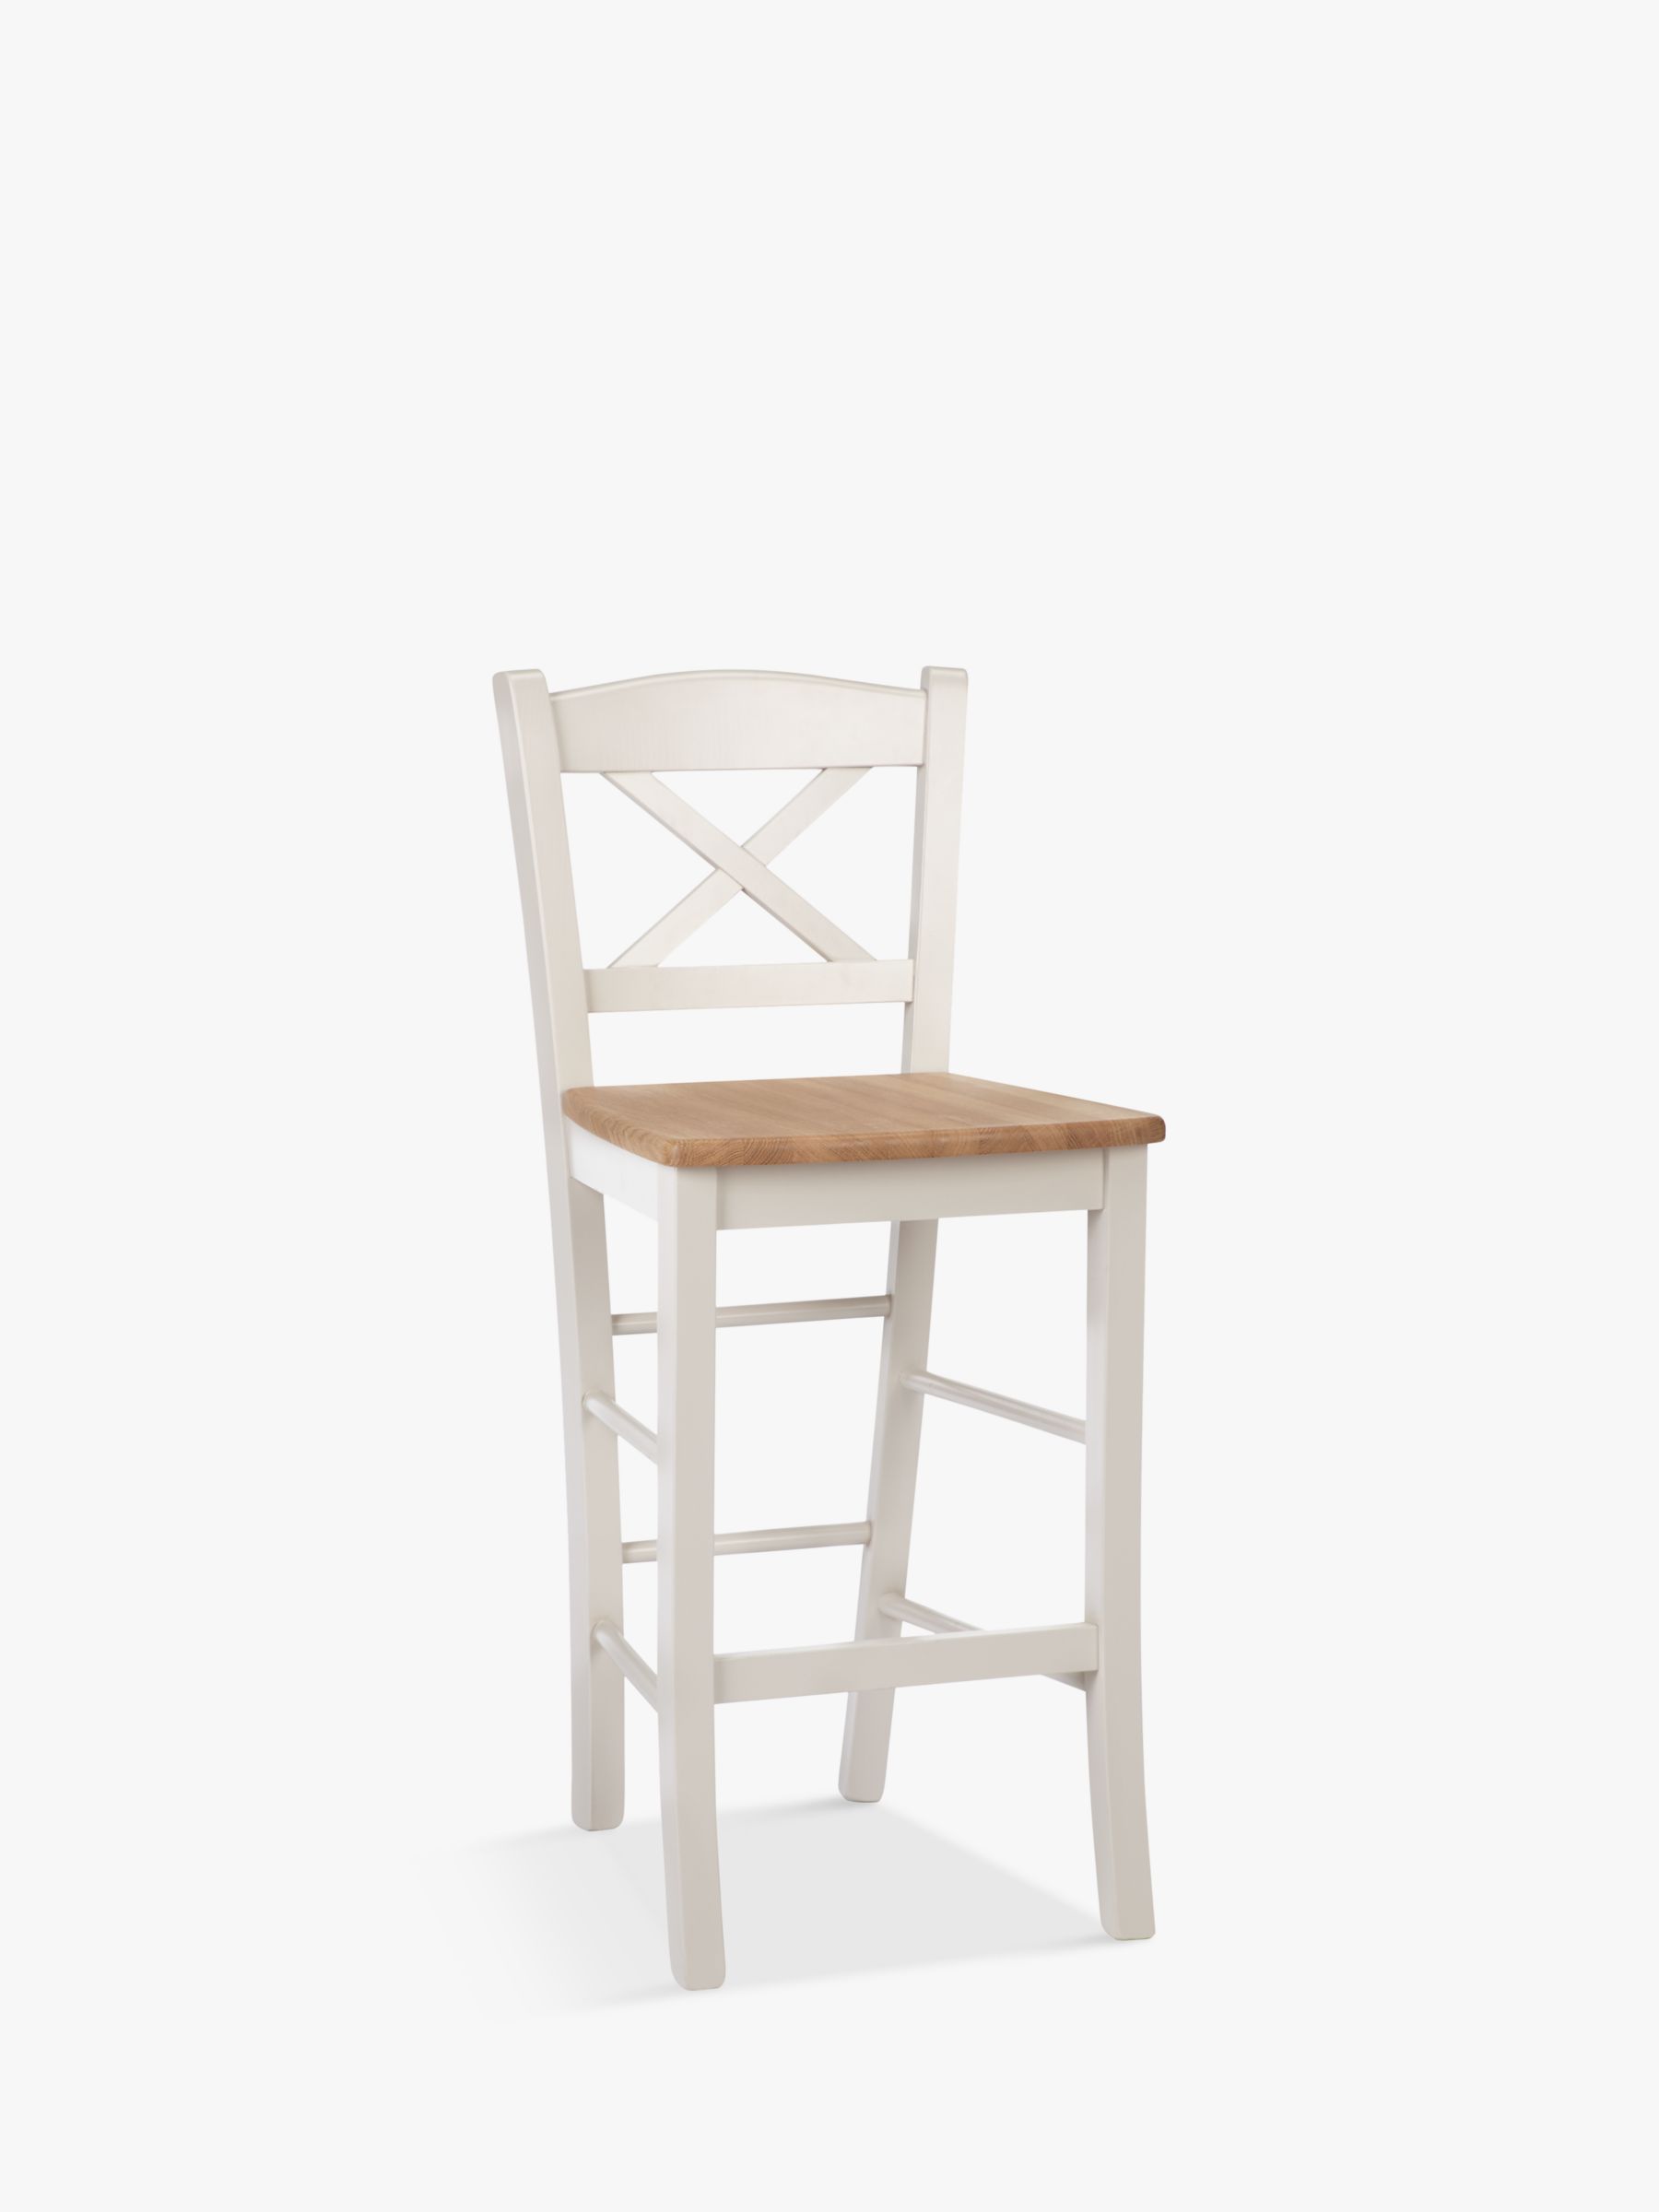 Bar Chairs Stools John Lewis Partners, White Wooden Counter Stools With Backs